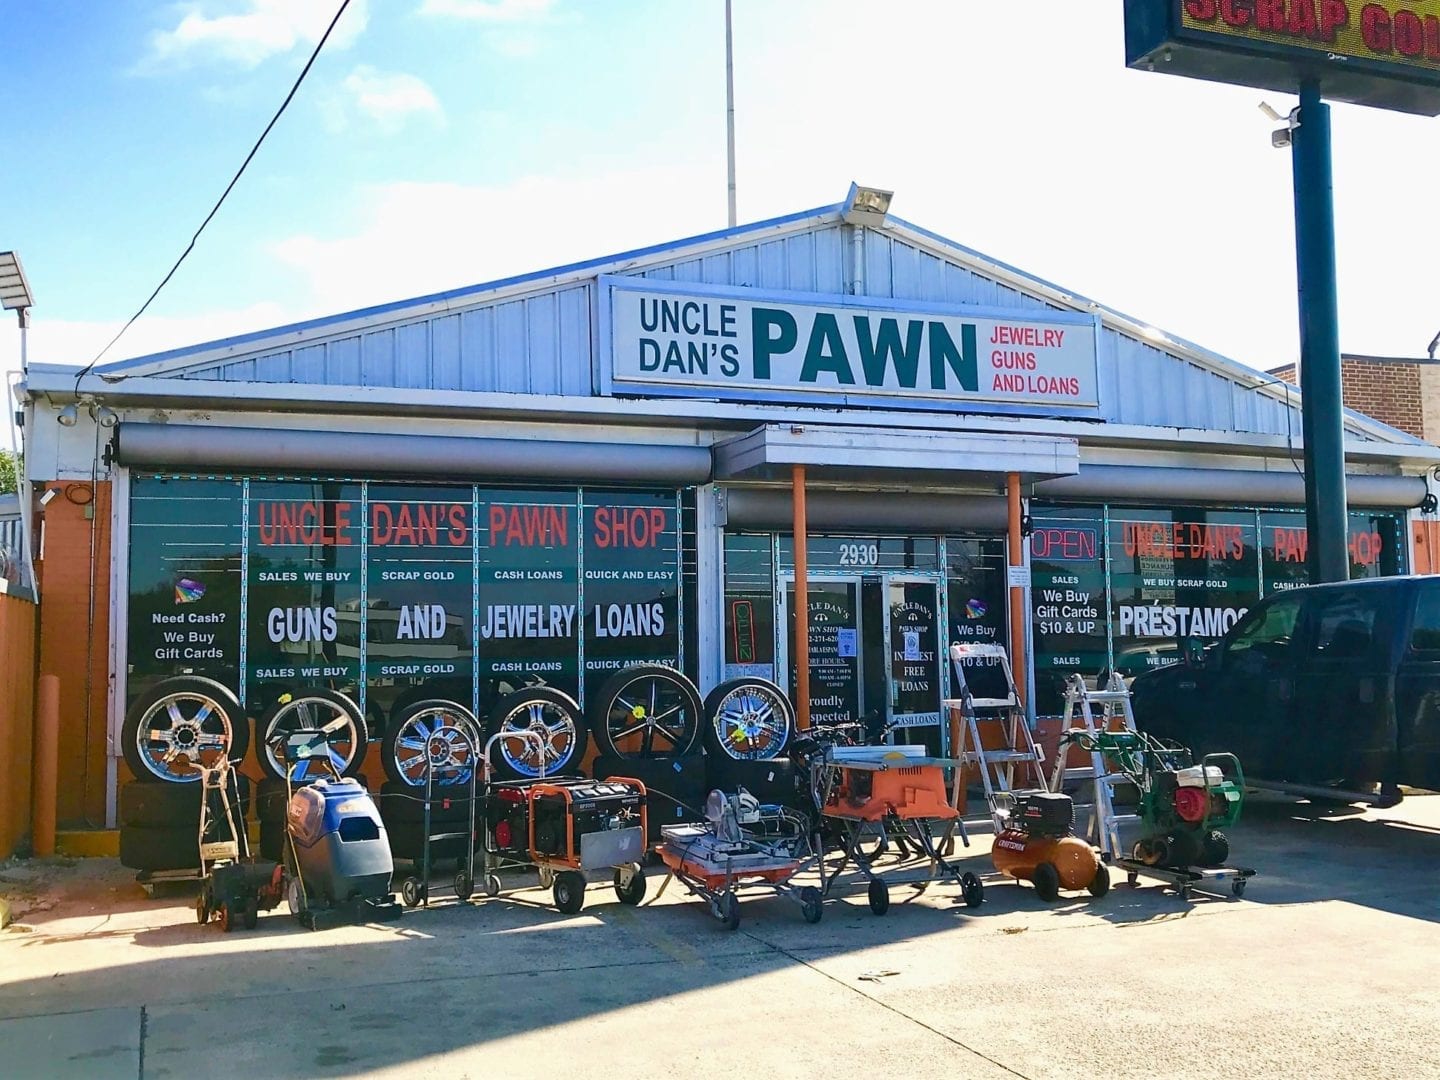 Uncle Dan's Pawn Shops Garland store located on Dairy Rd near Broa...